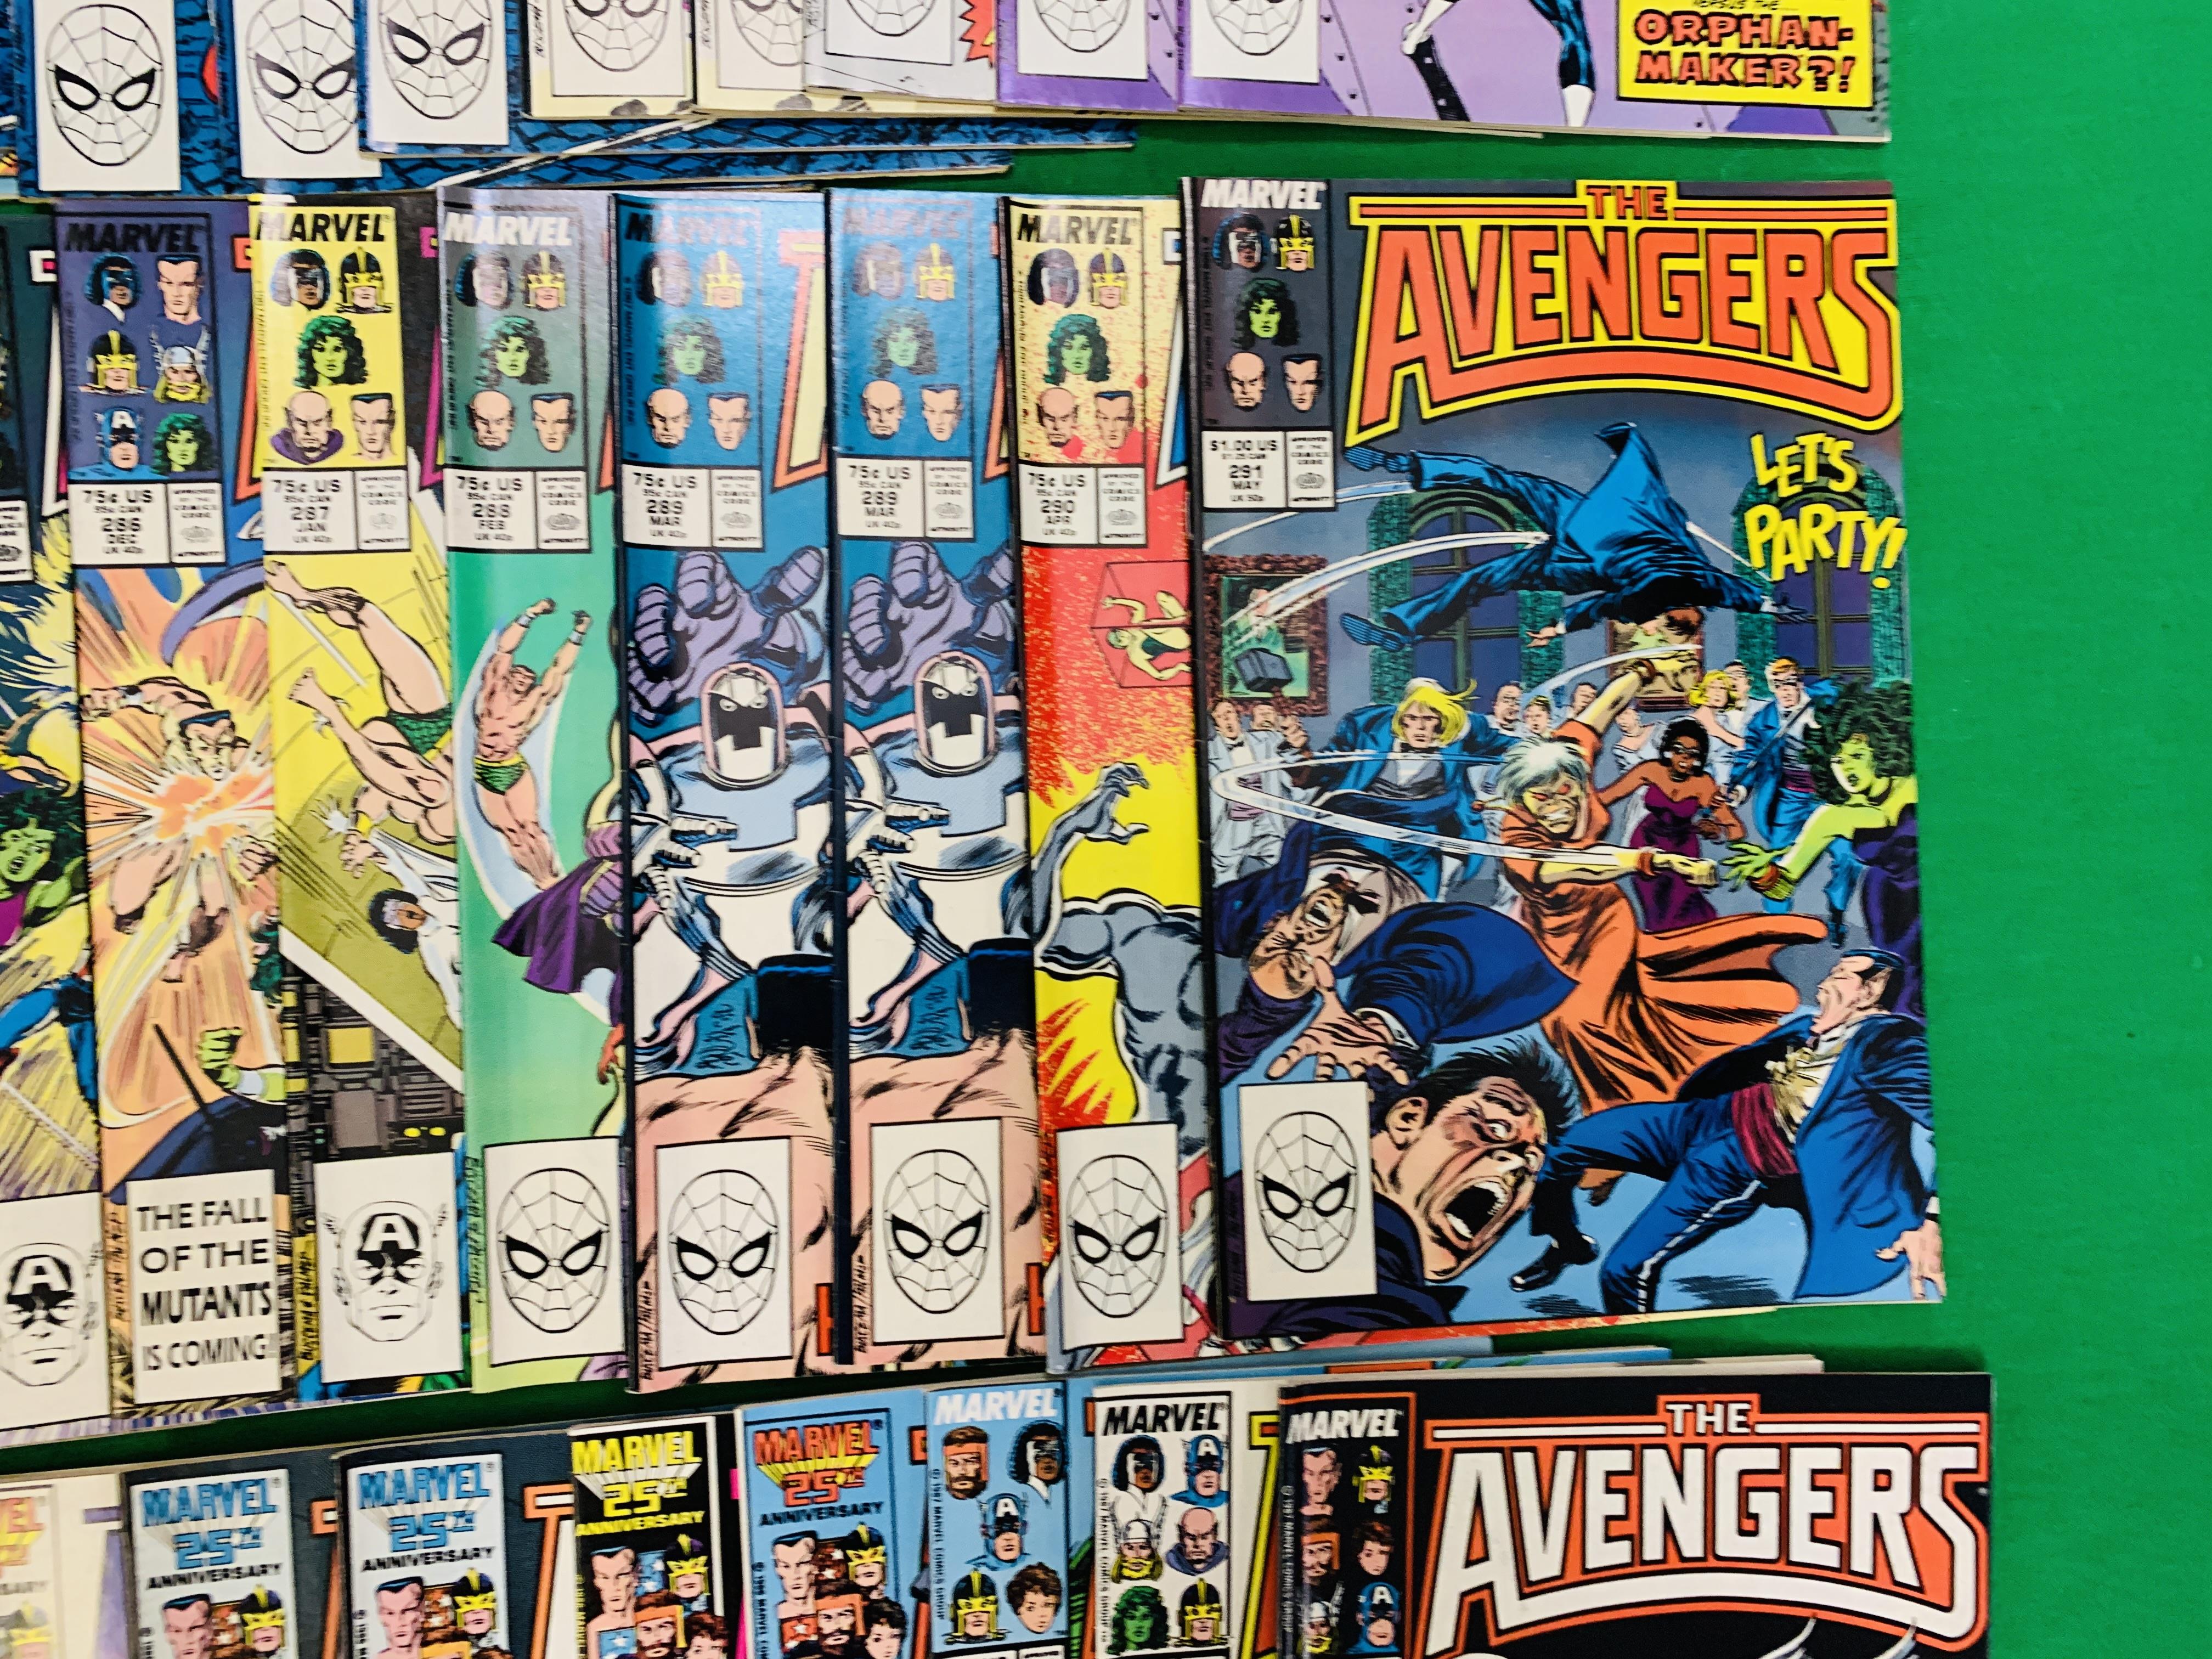 MARVEL COMICS THE AVENGERS NO. 101 - 299, MISSING ISSUES 103 AND 110. - Image 128 of 130